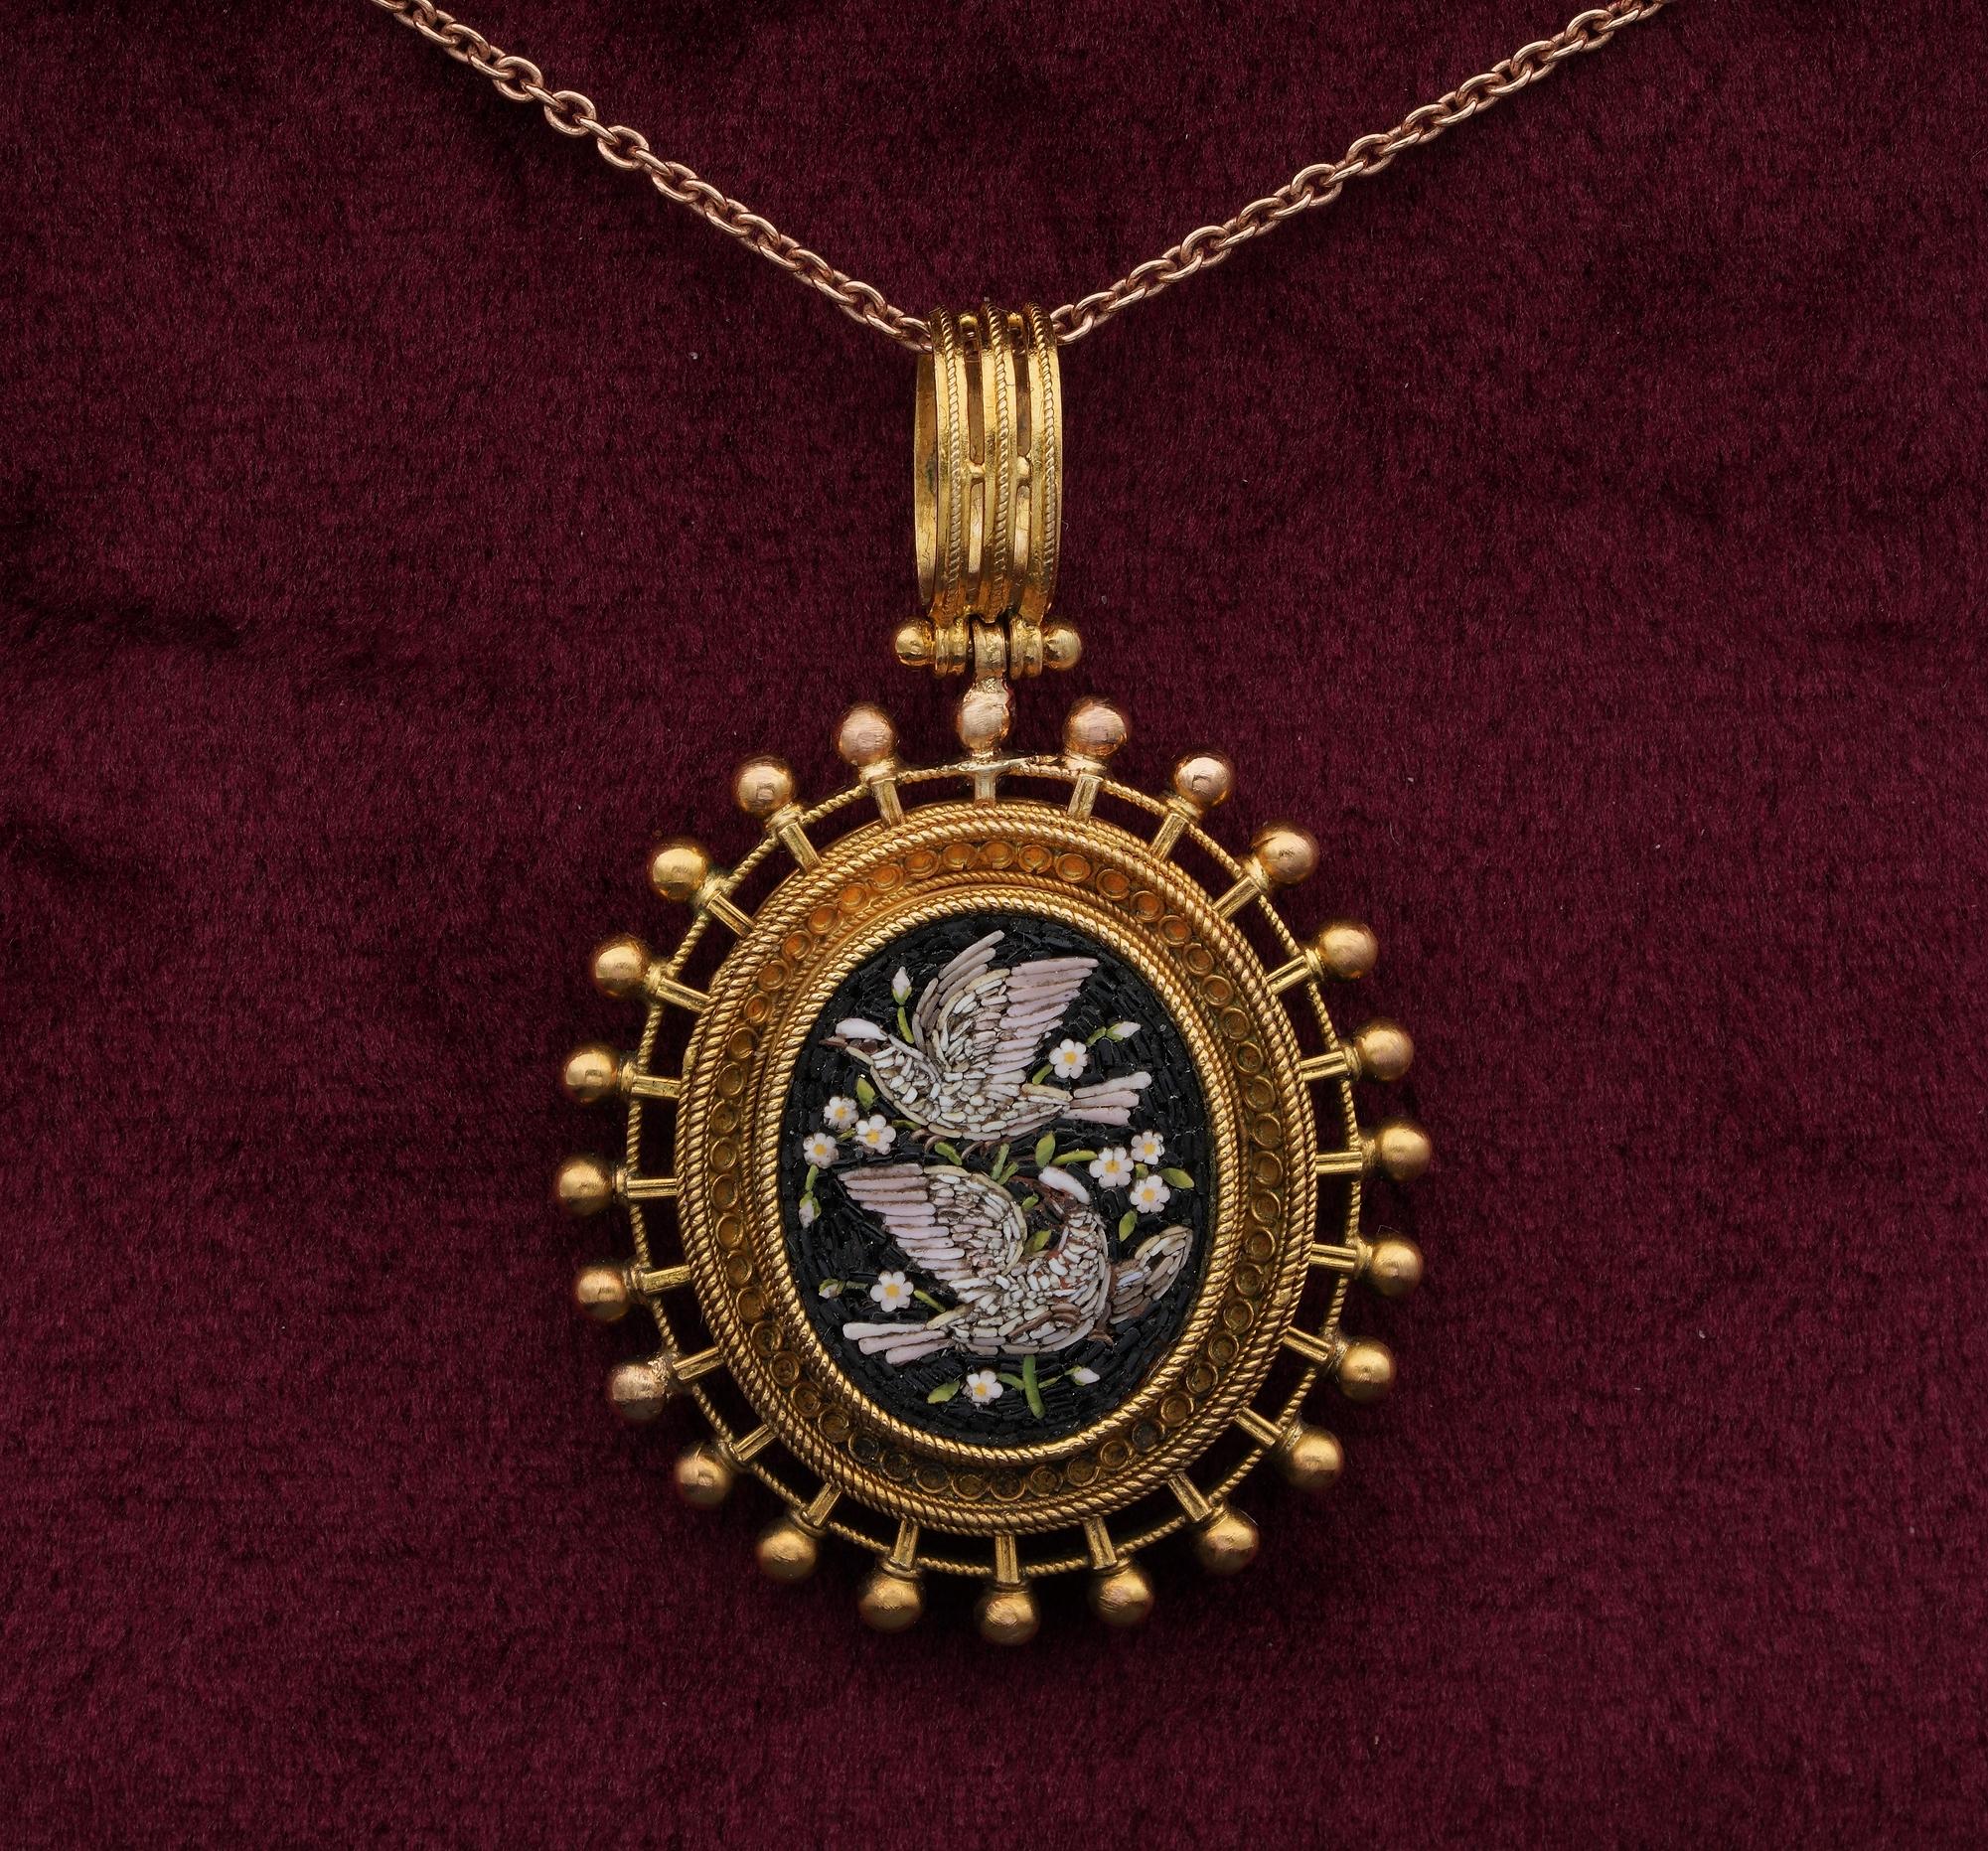 Victorian most wanted
This beautiful Victorian period 18 KT gold has been hand crafted of solid 18 KT tested
One very beautiful and distinctive in design, gold artwork, with beaded frame surrounding several tiers of ropes, detailed in granulation